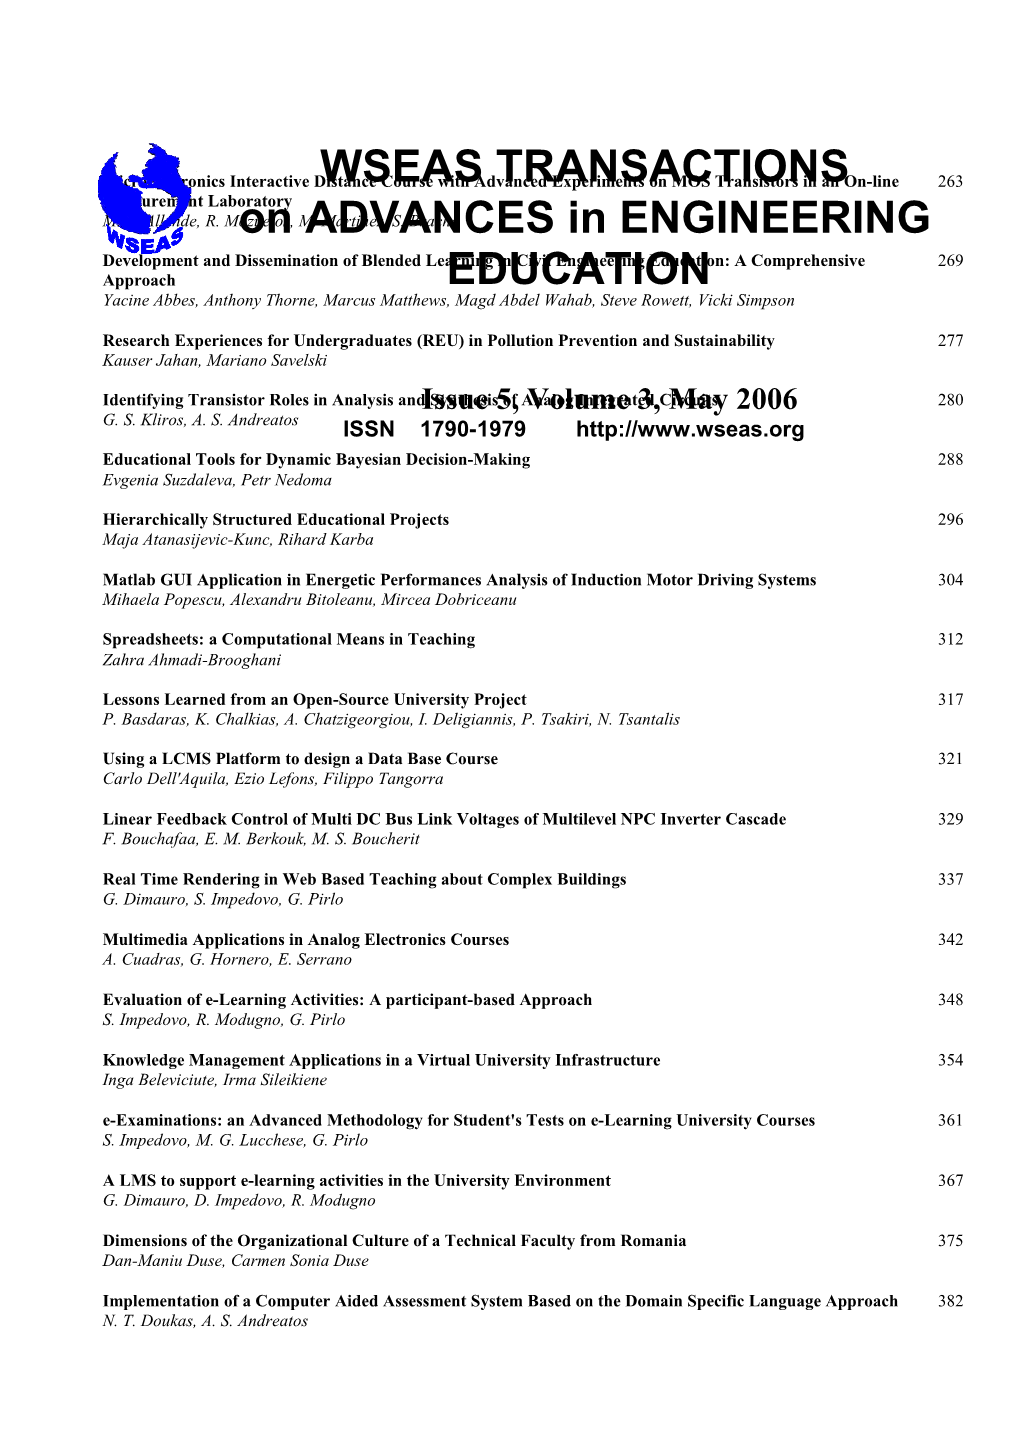 WSEAS Trans. on ADVANCES in ENGINEERING EDUCATION, May 2006